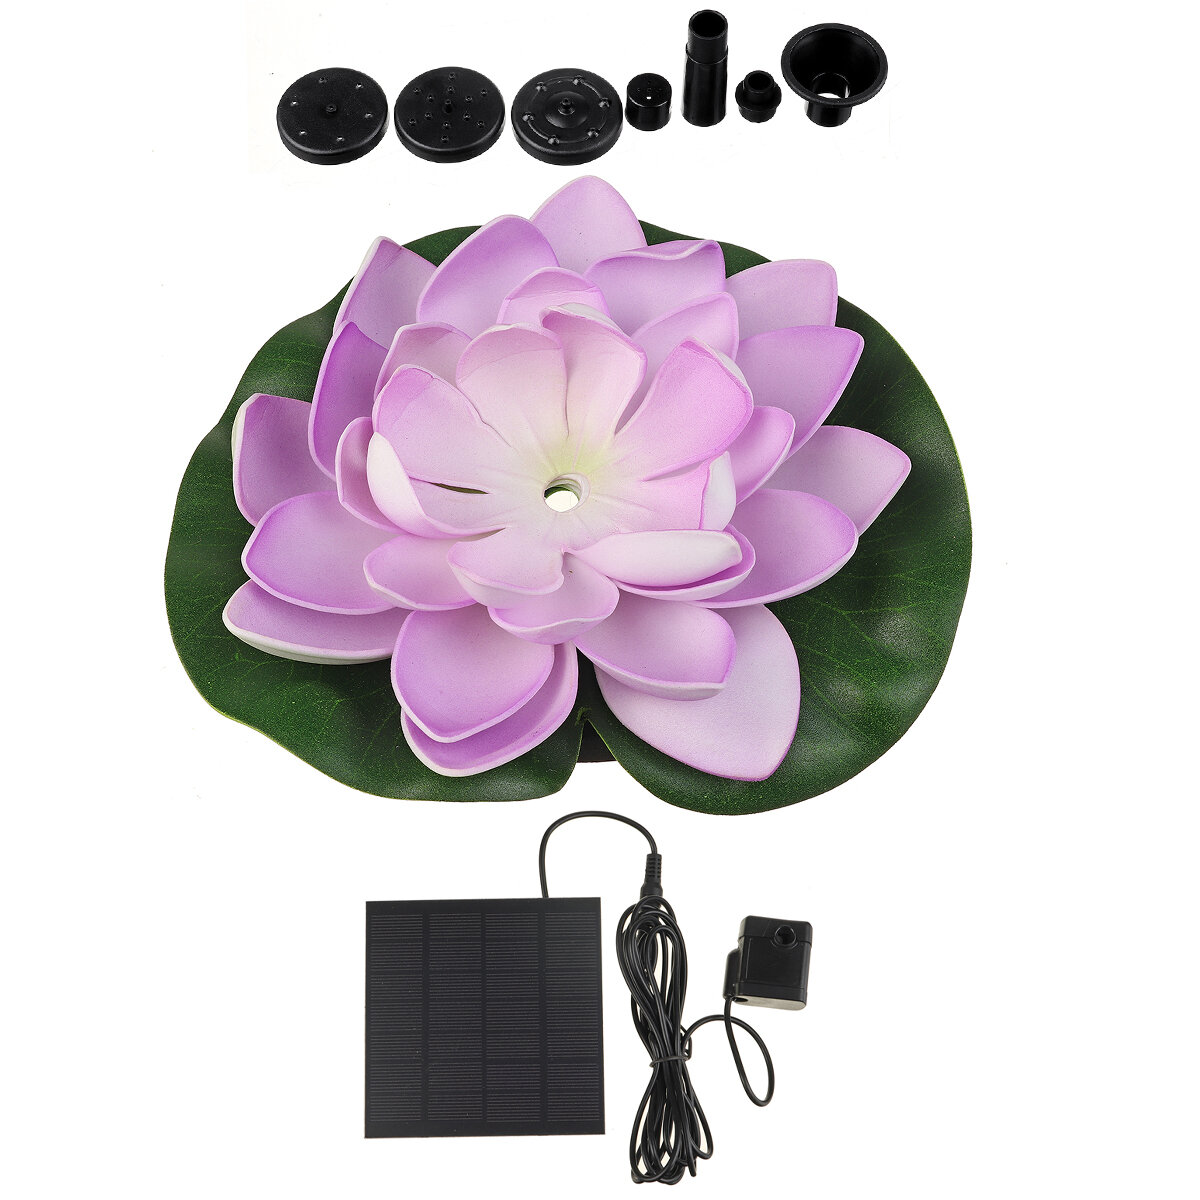 

7V 1.2W Floating Solar Fountain Flower Style Garden Water Fountain Pool Pond Solar Panel Powered Fountain Water Pump